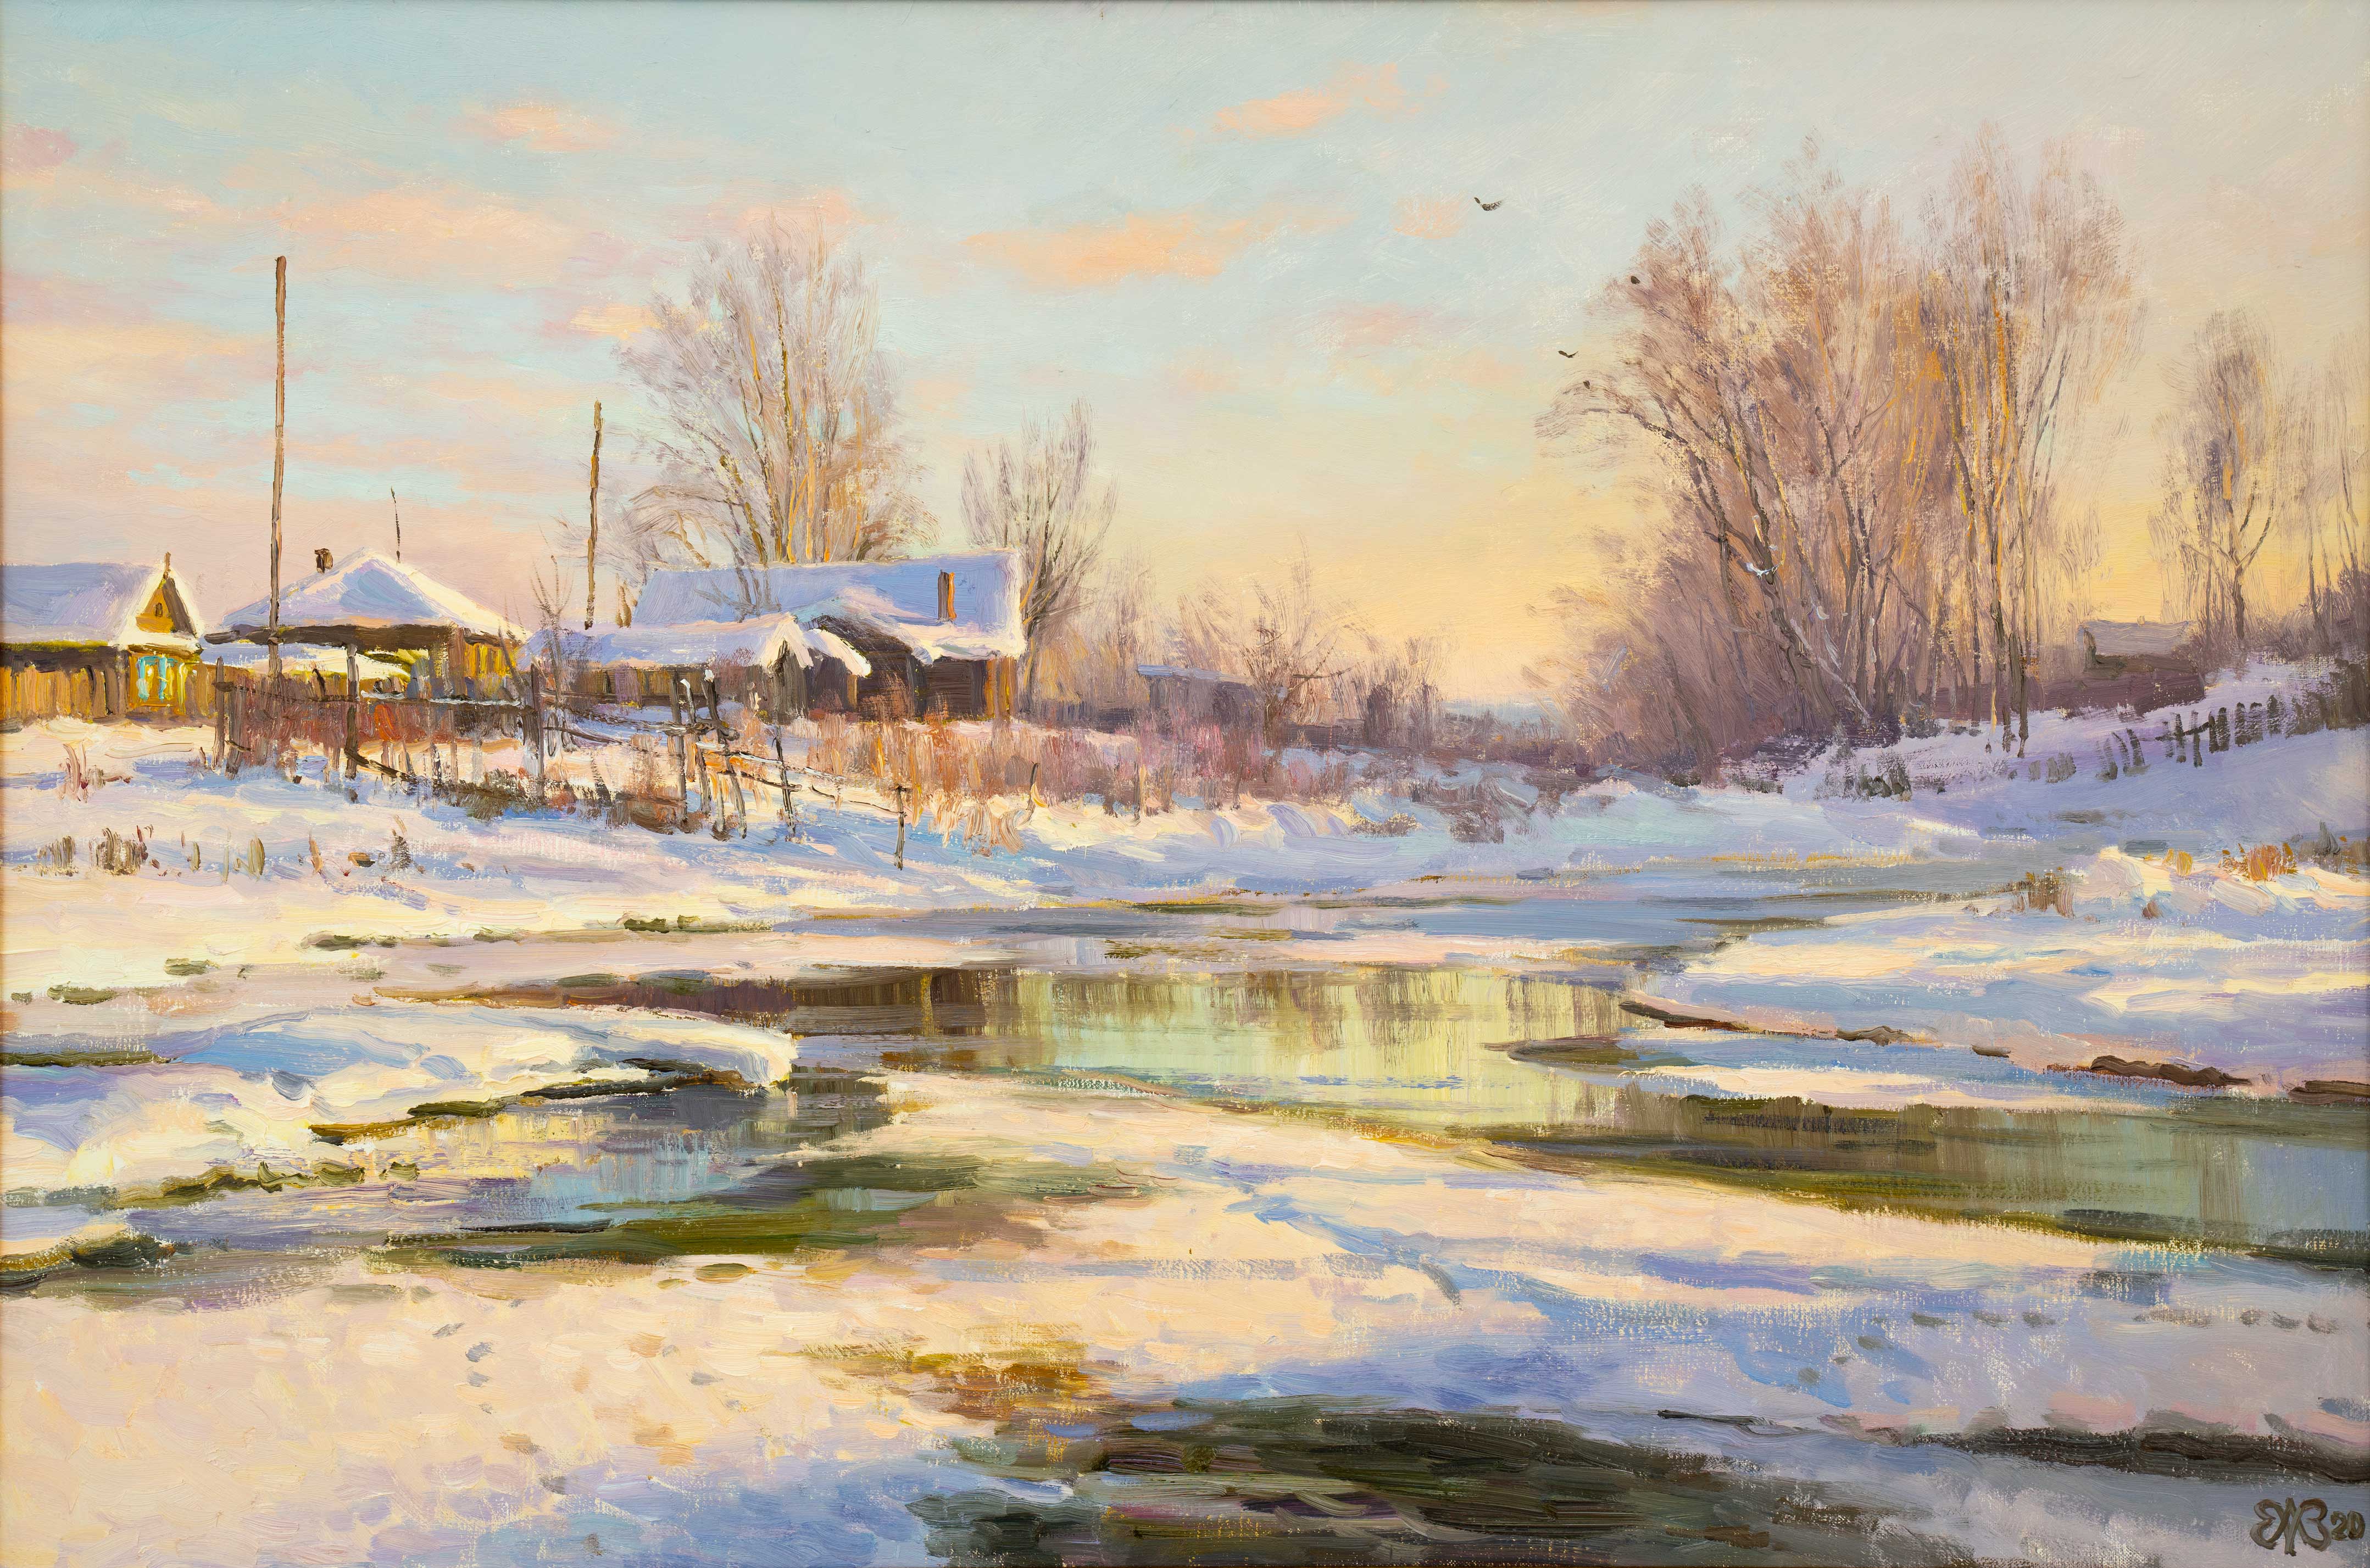 River Is Waking Up. Uktus - 1, Alexey Efremov, Buy the painting Oil